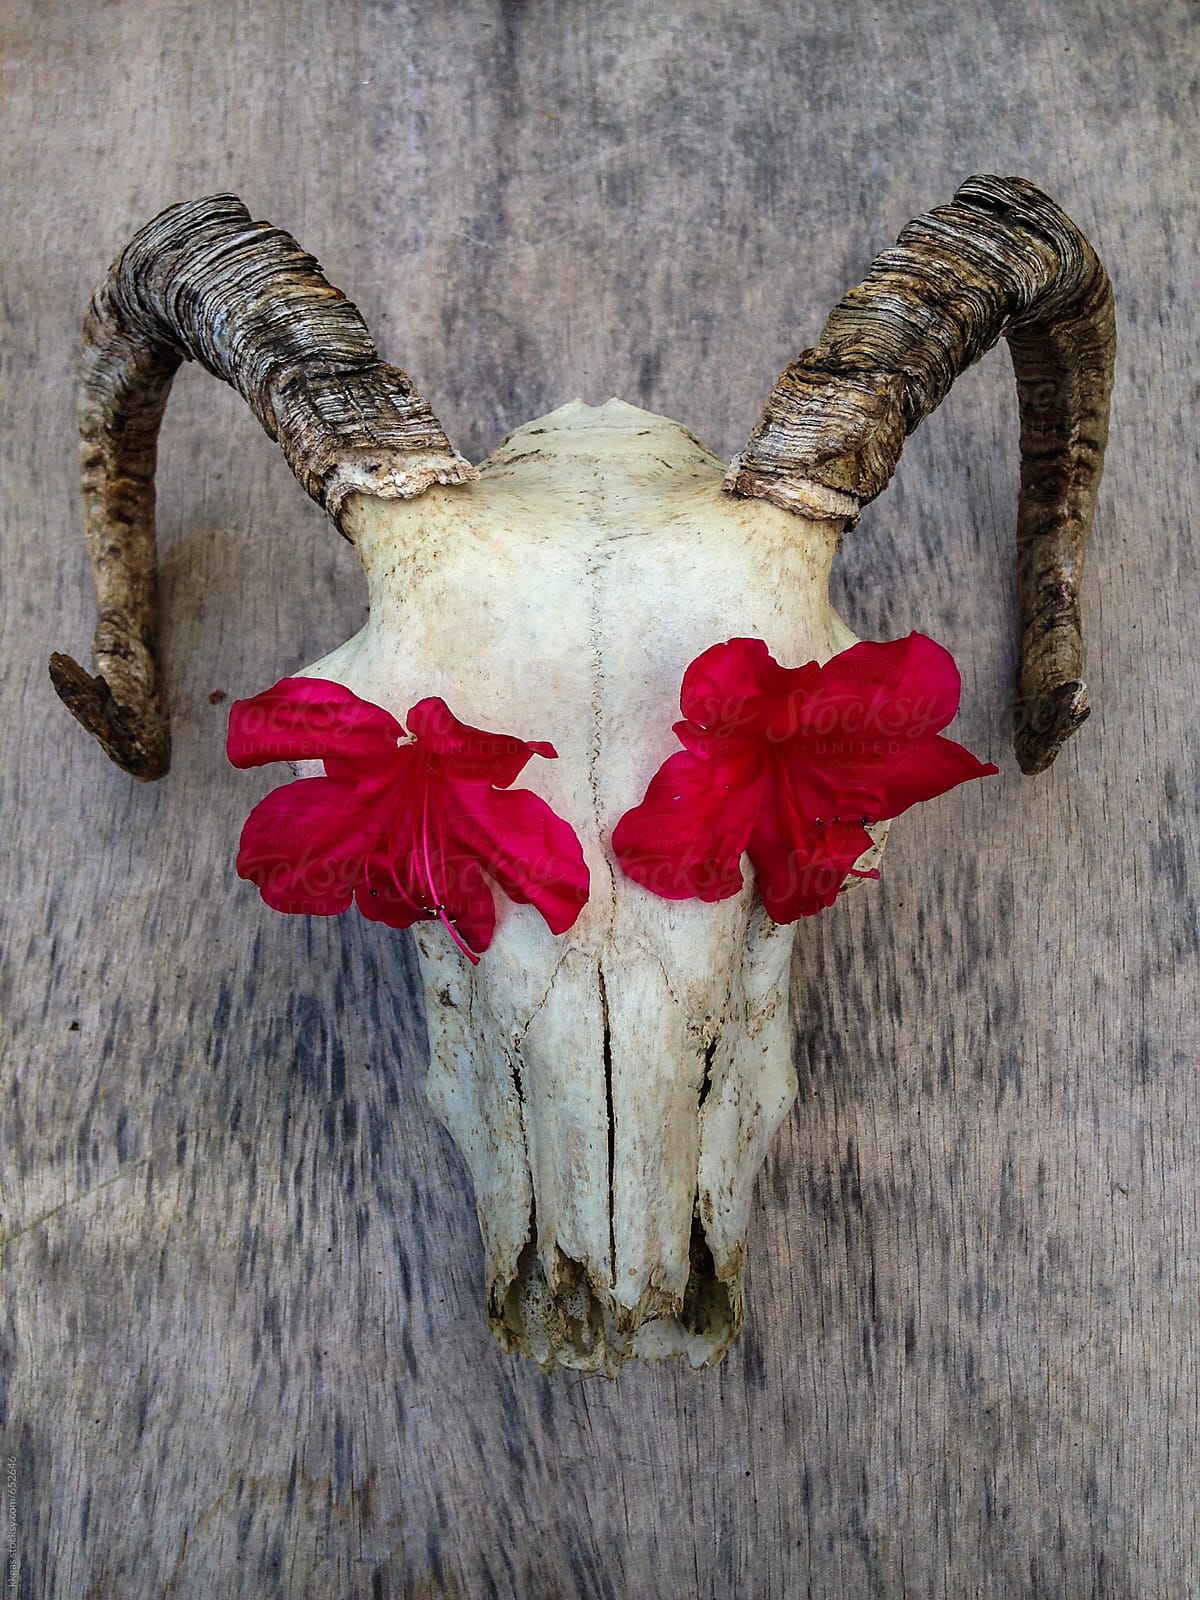 Rams skull with red flowers in eye sockets.